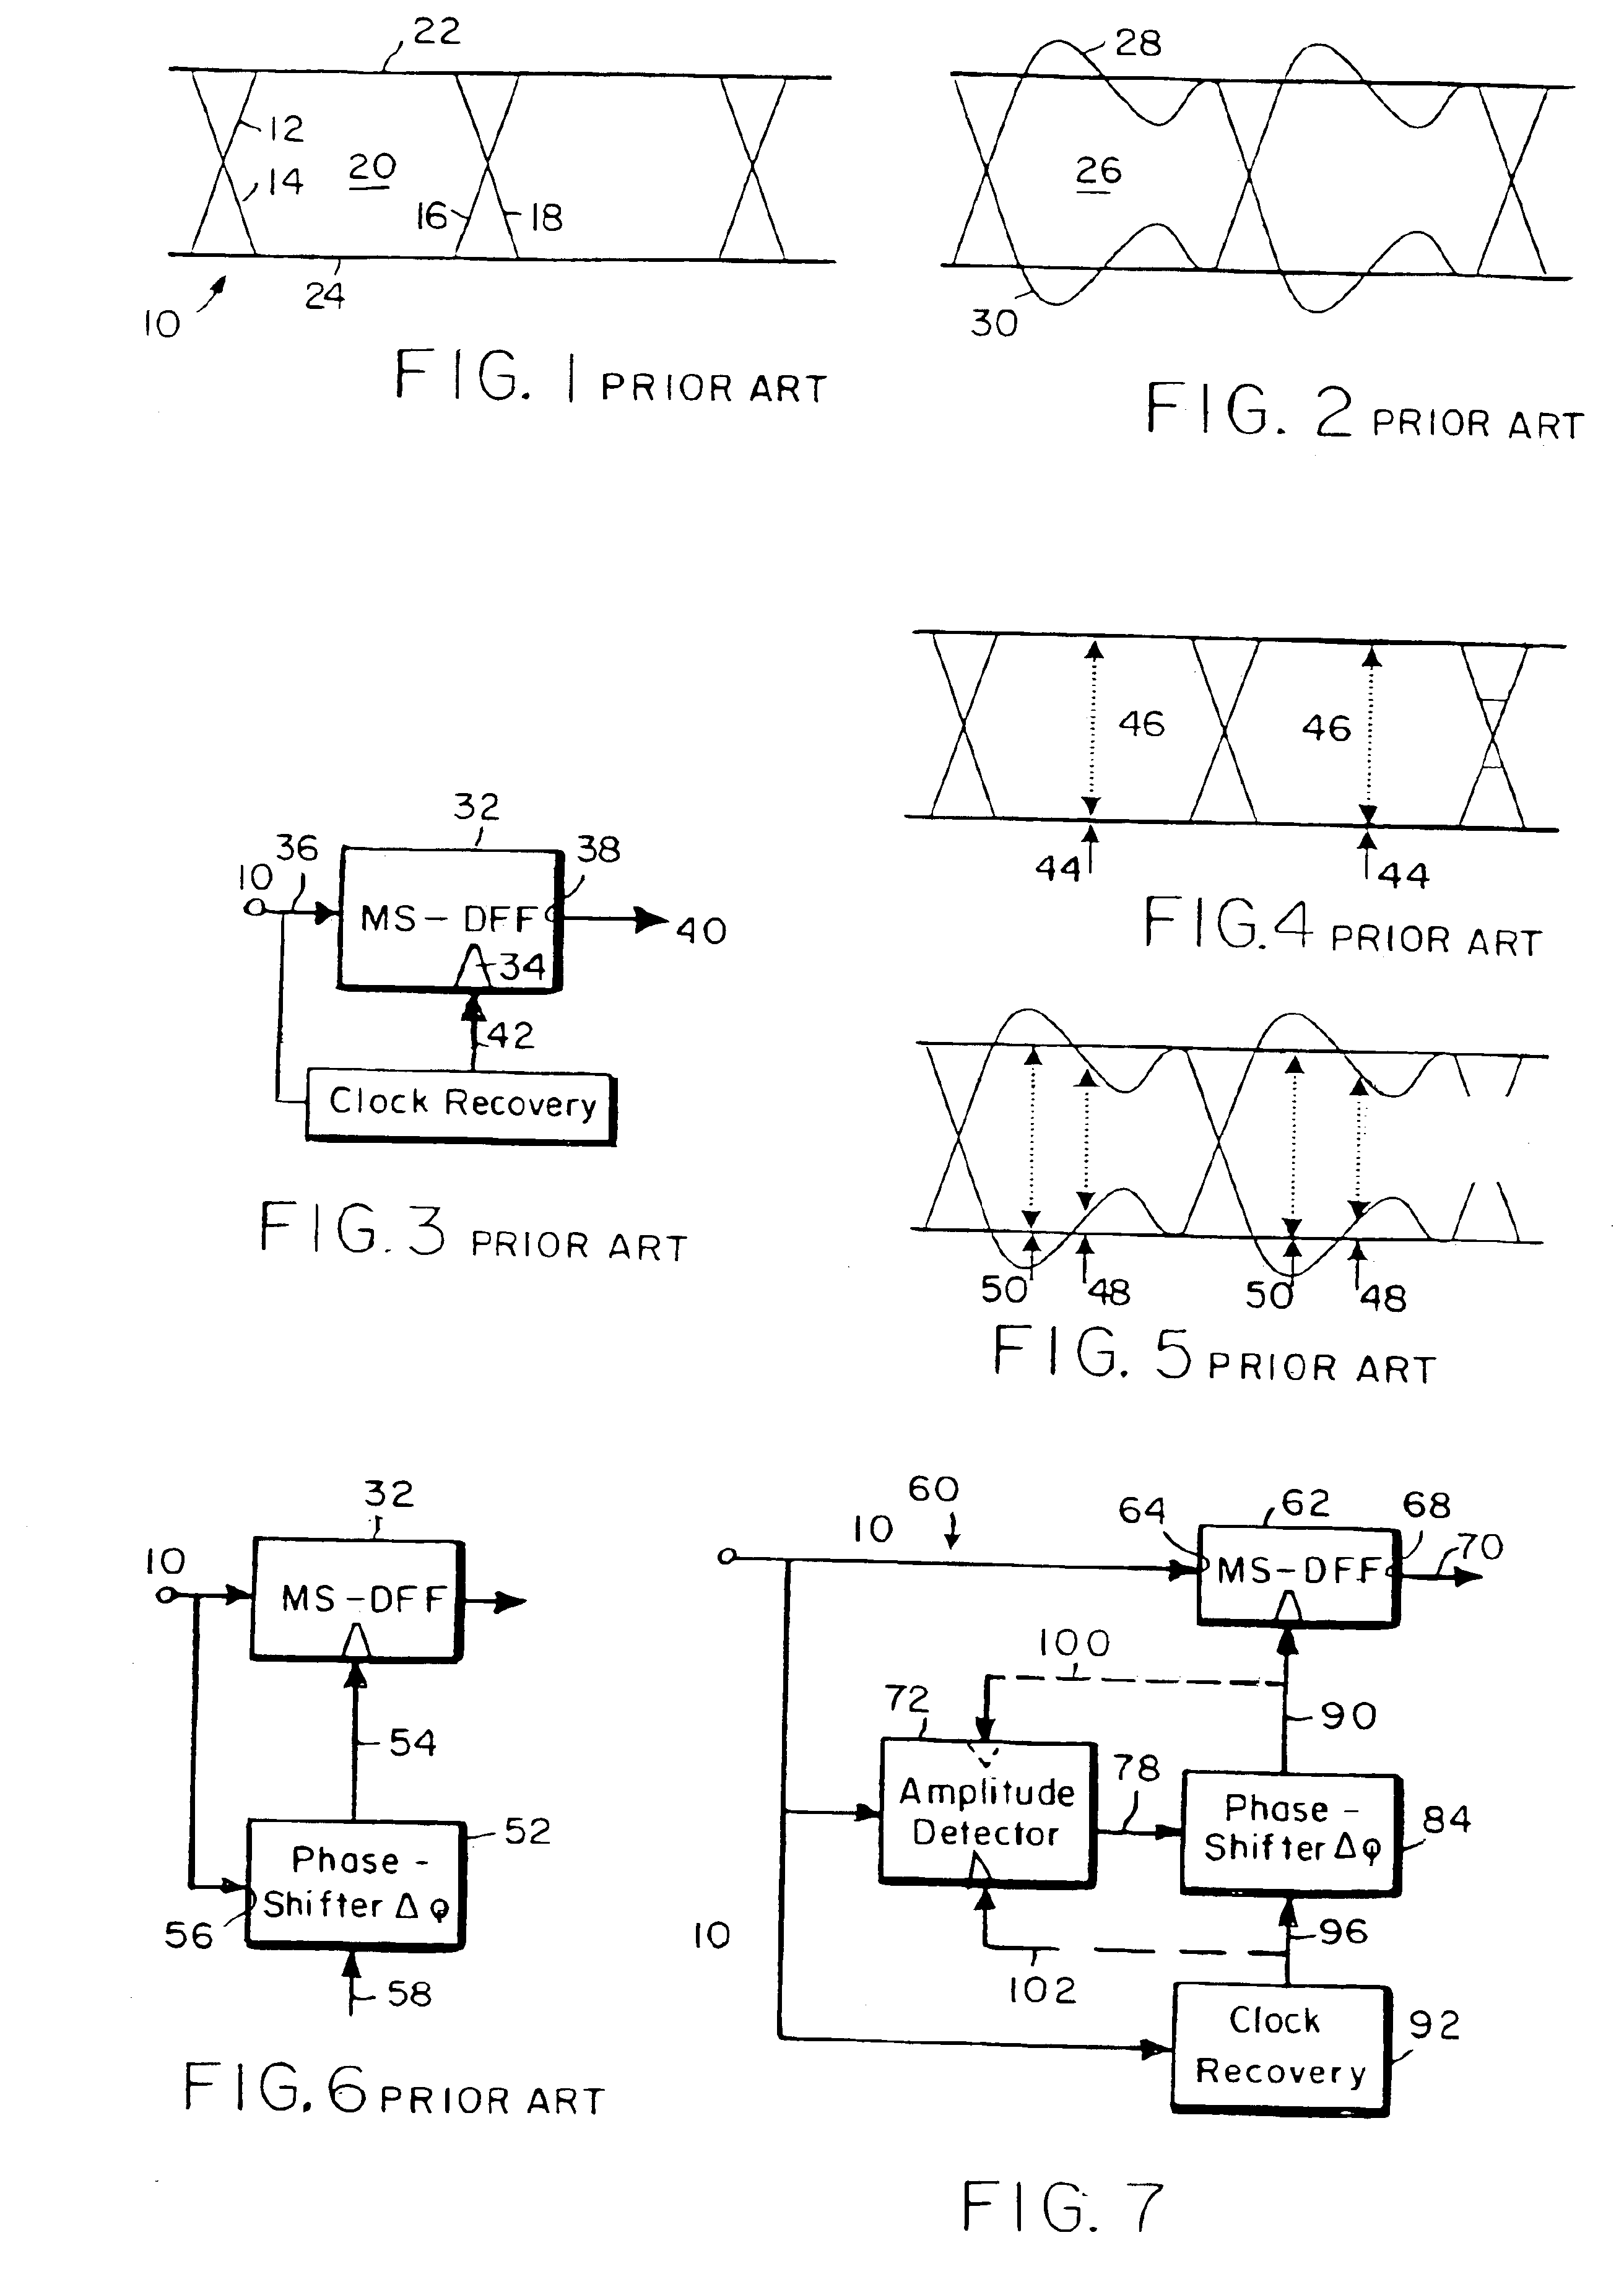 Amplitude detection for controlling the decision instant for sampling as a data flow